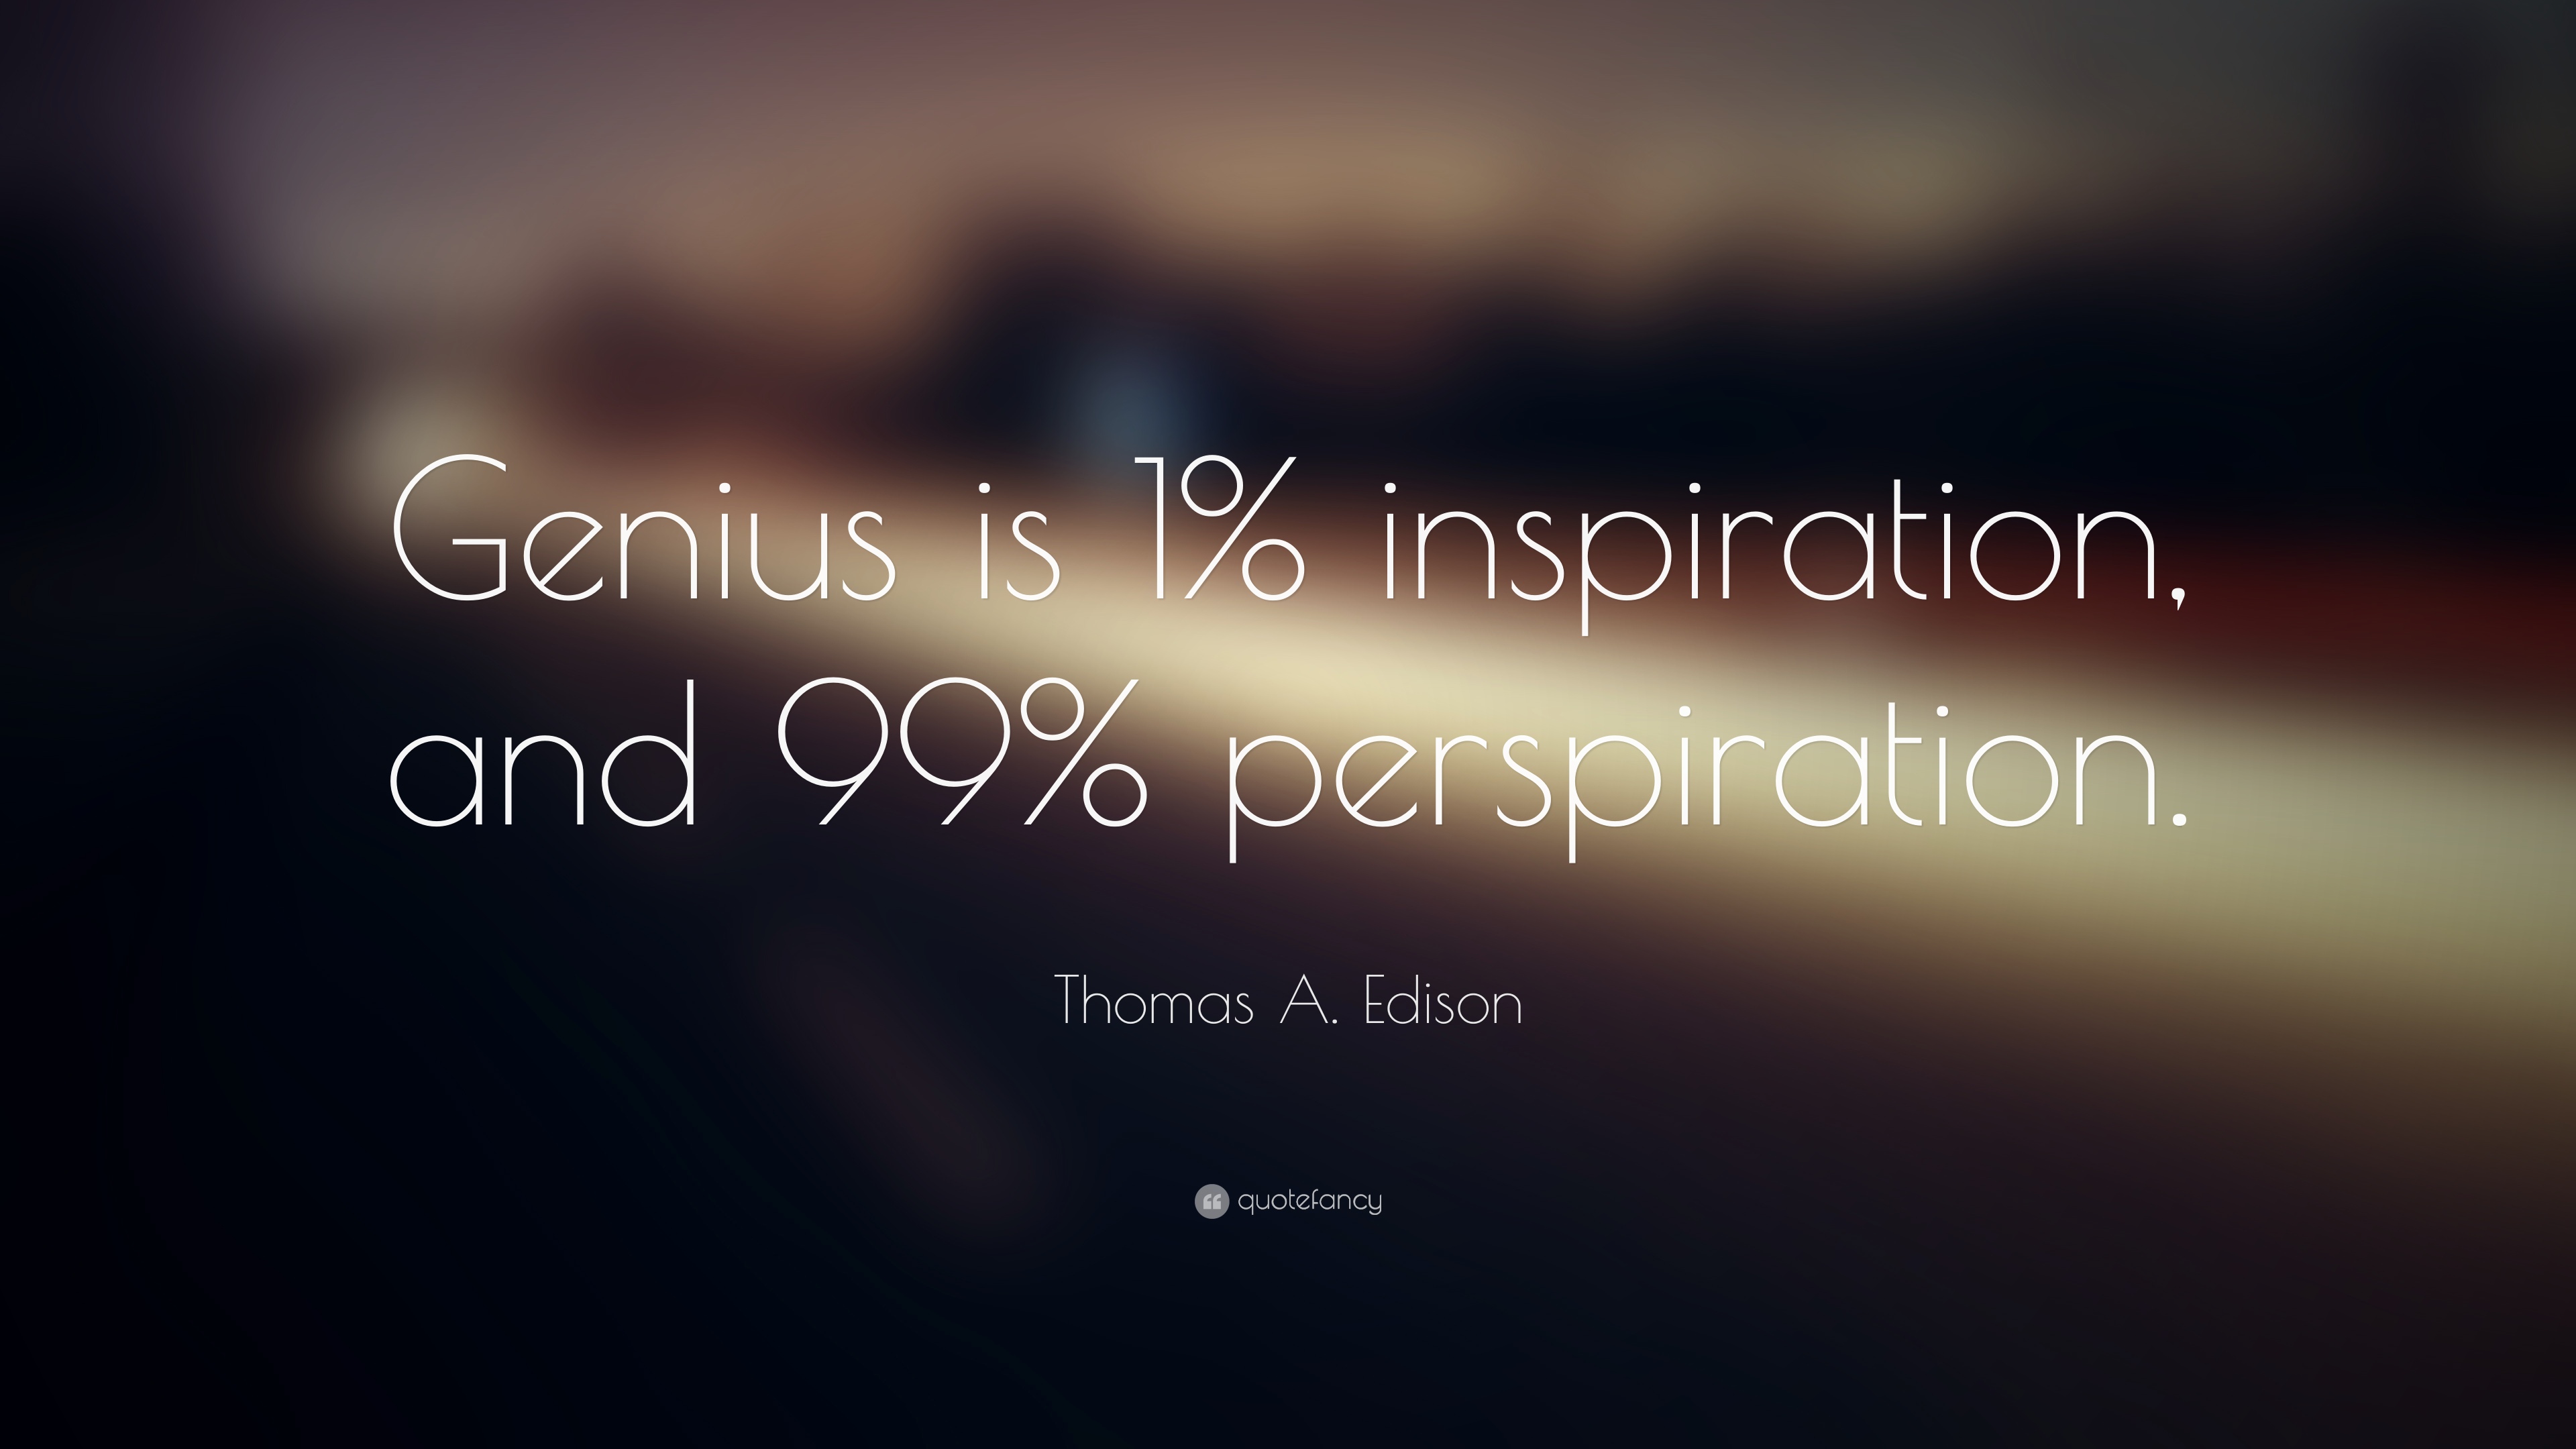 Edison Quote - Tell The World Quotes - HD Wallpaper 